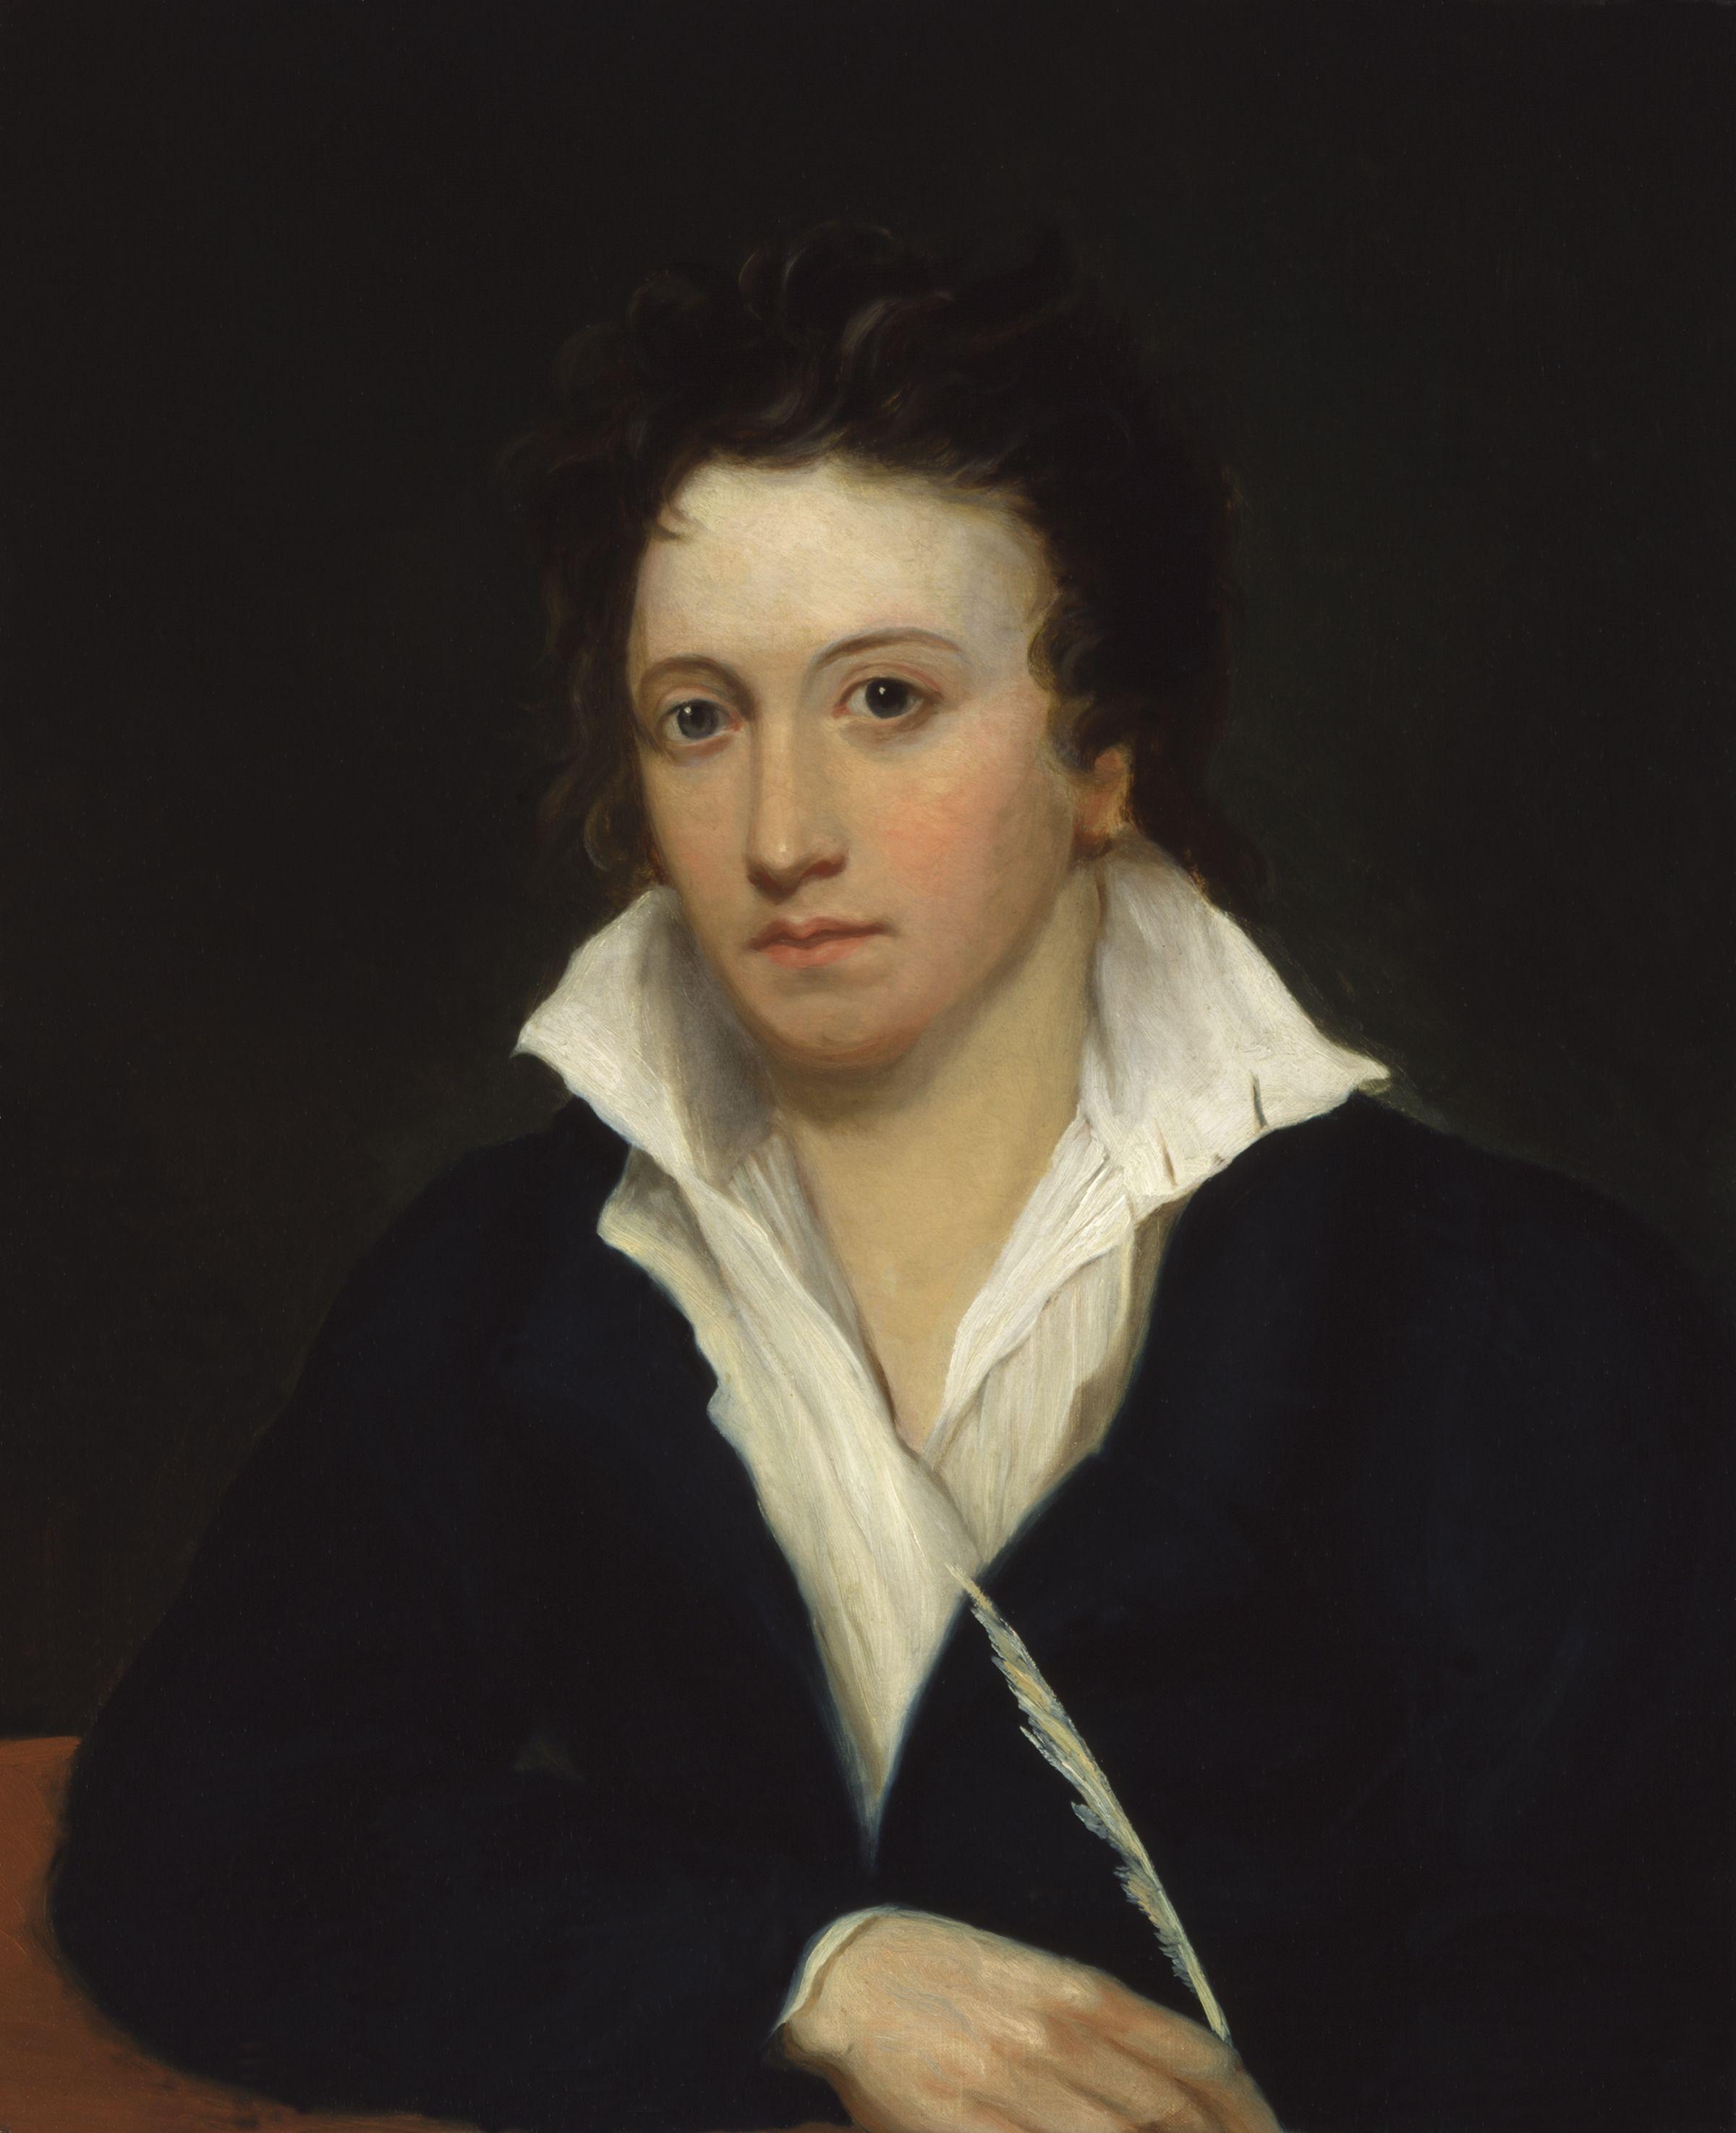 auteur Percy Bysshe Shelley